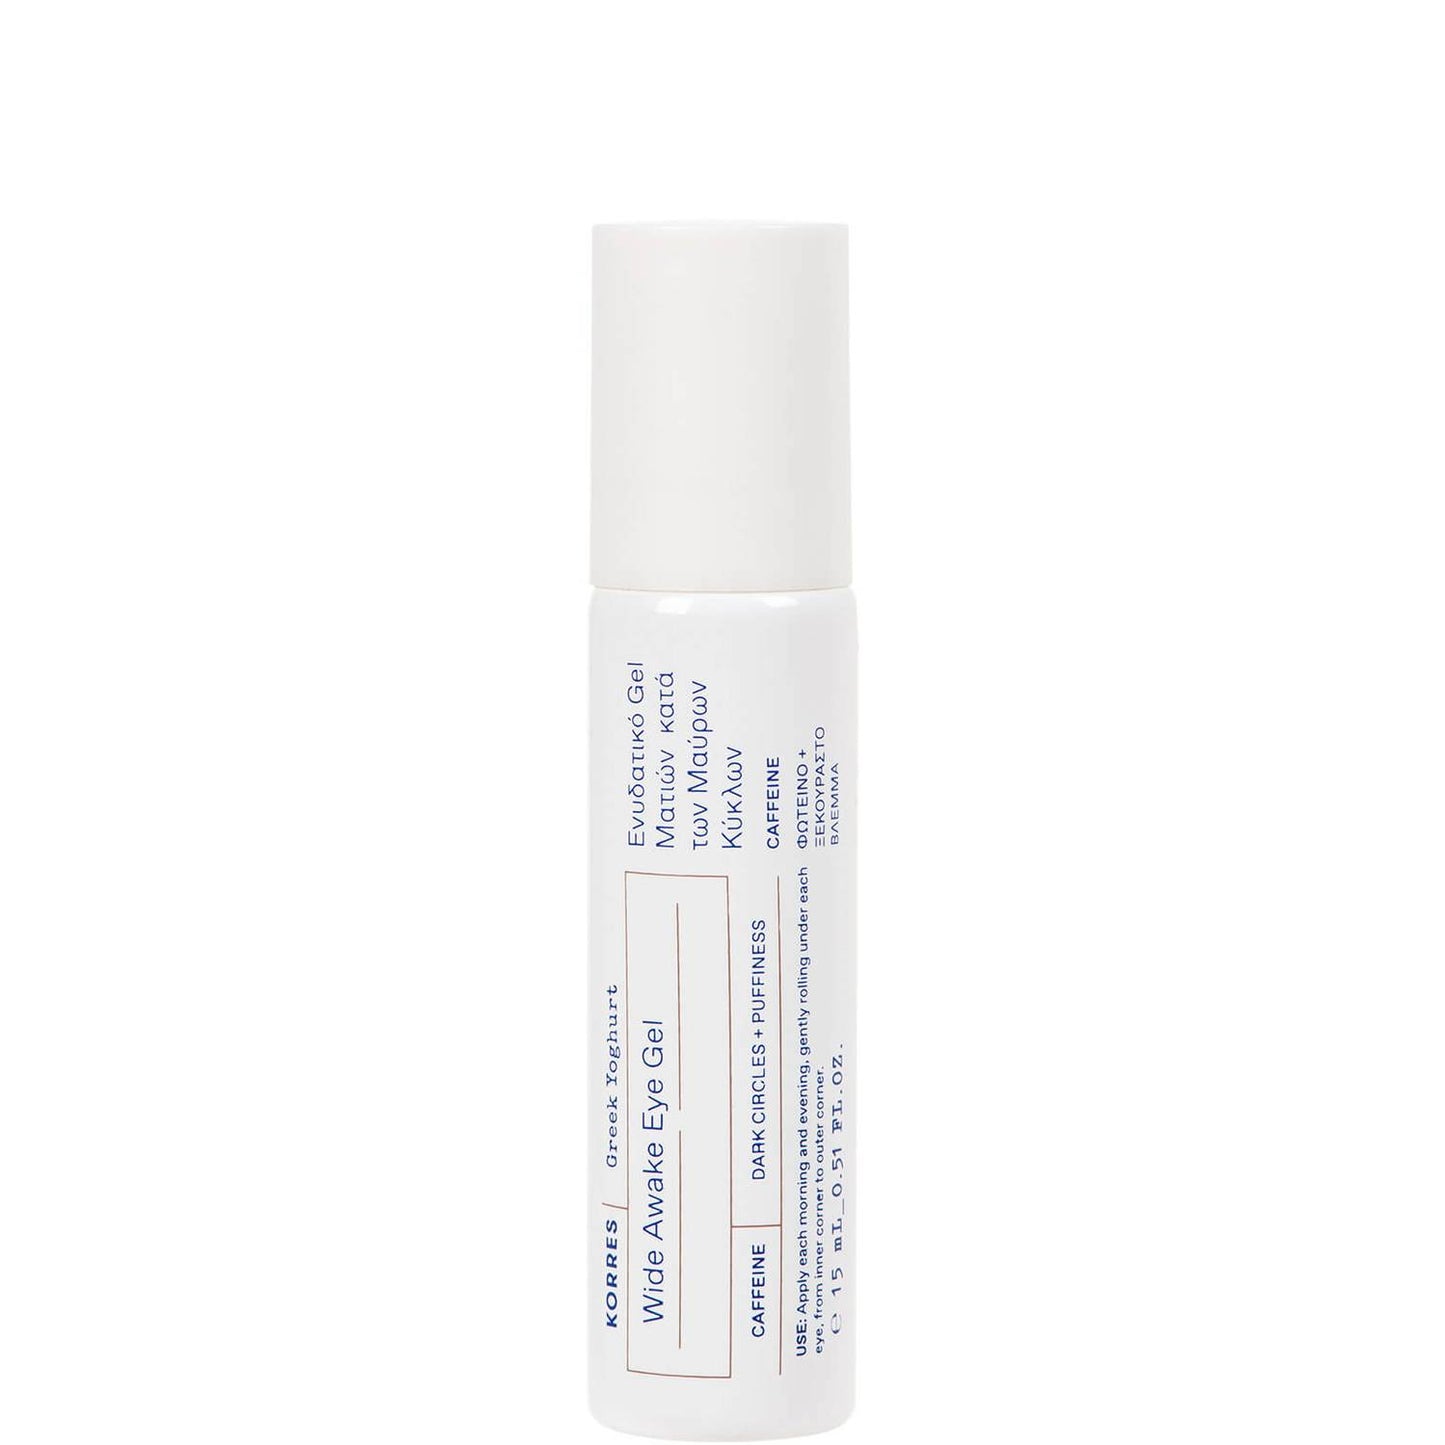 Korres Greek Yoghurt Wide Awake Eye Gel reduces the appearance of dark circles and puffiness